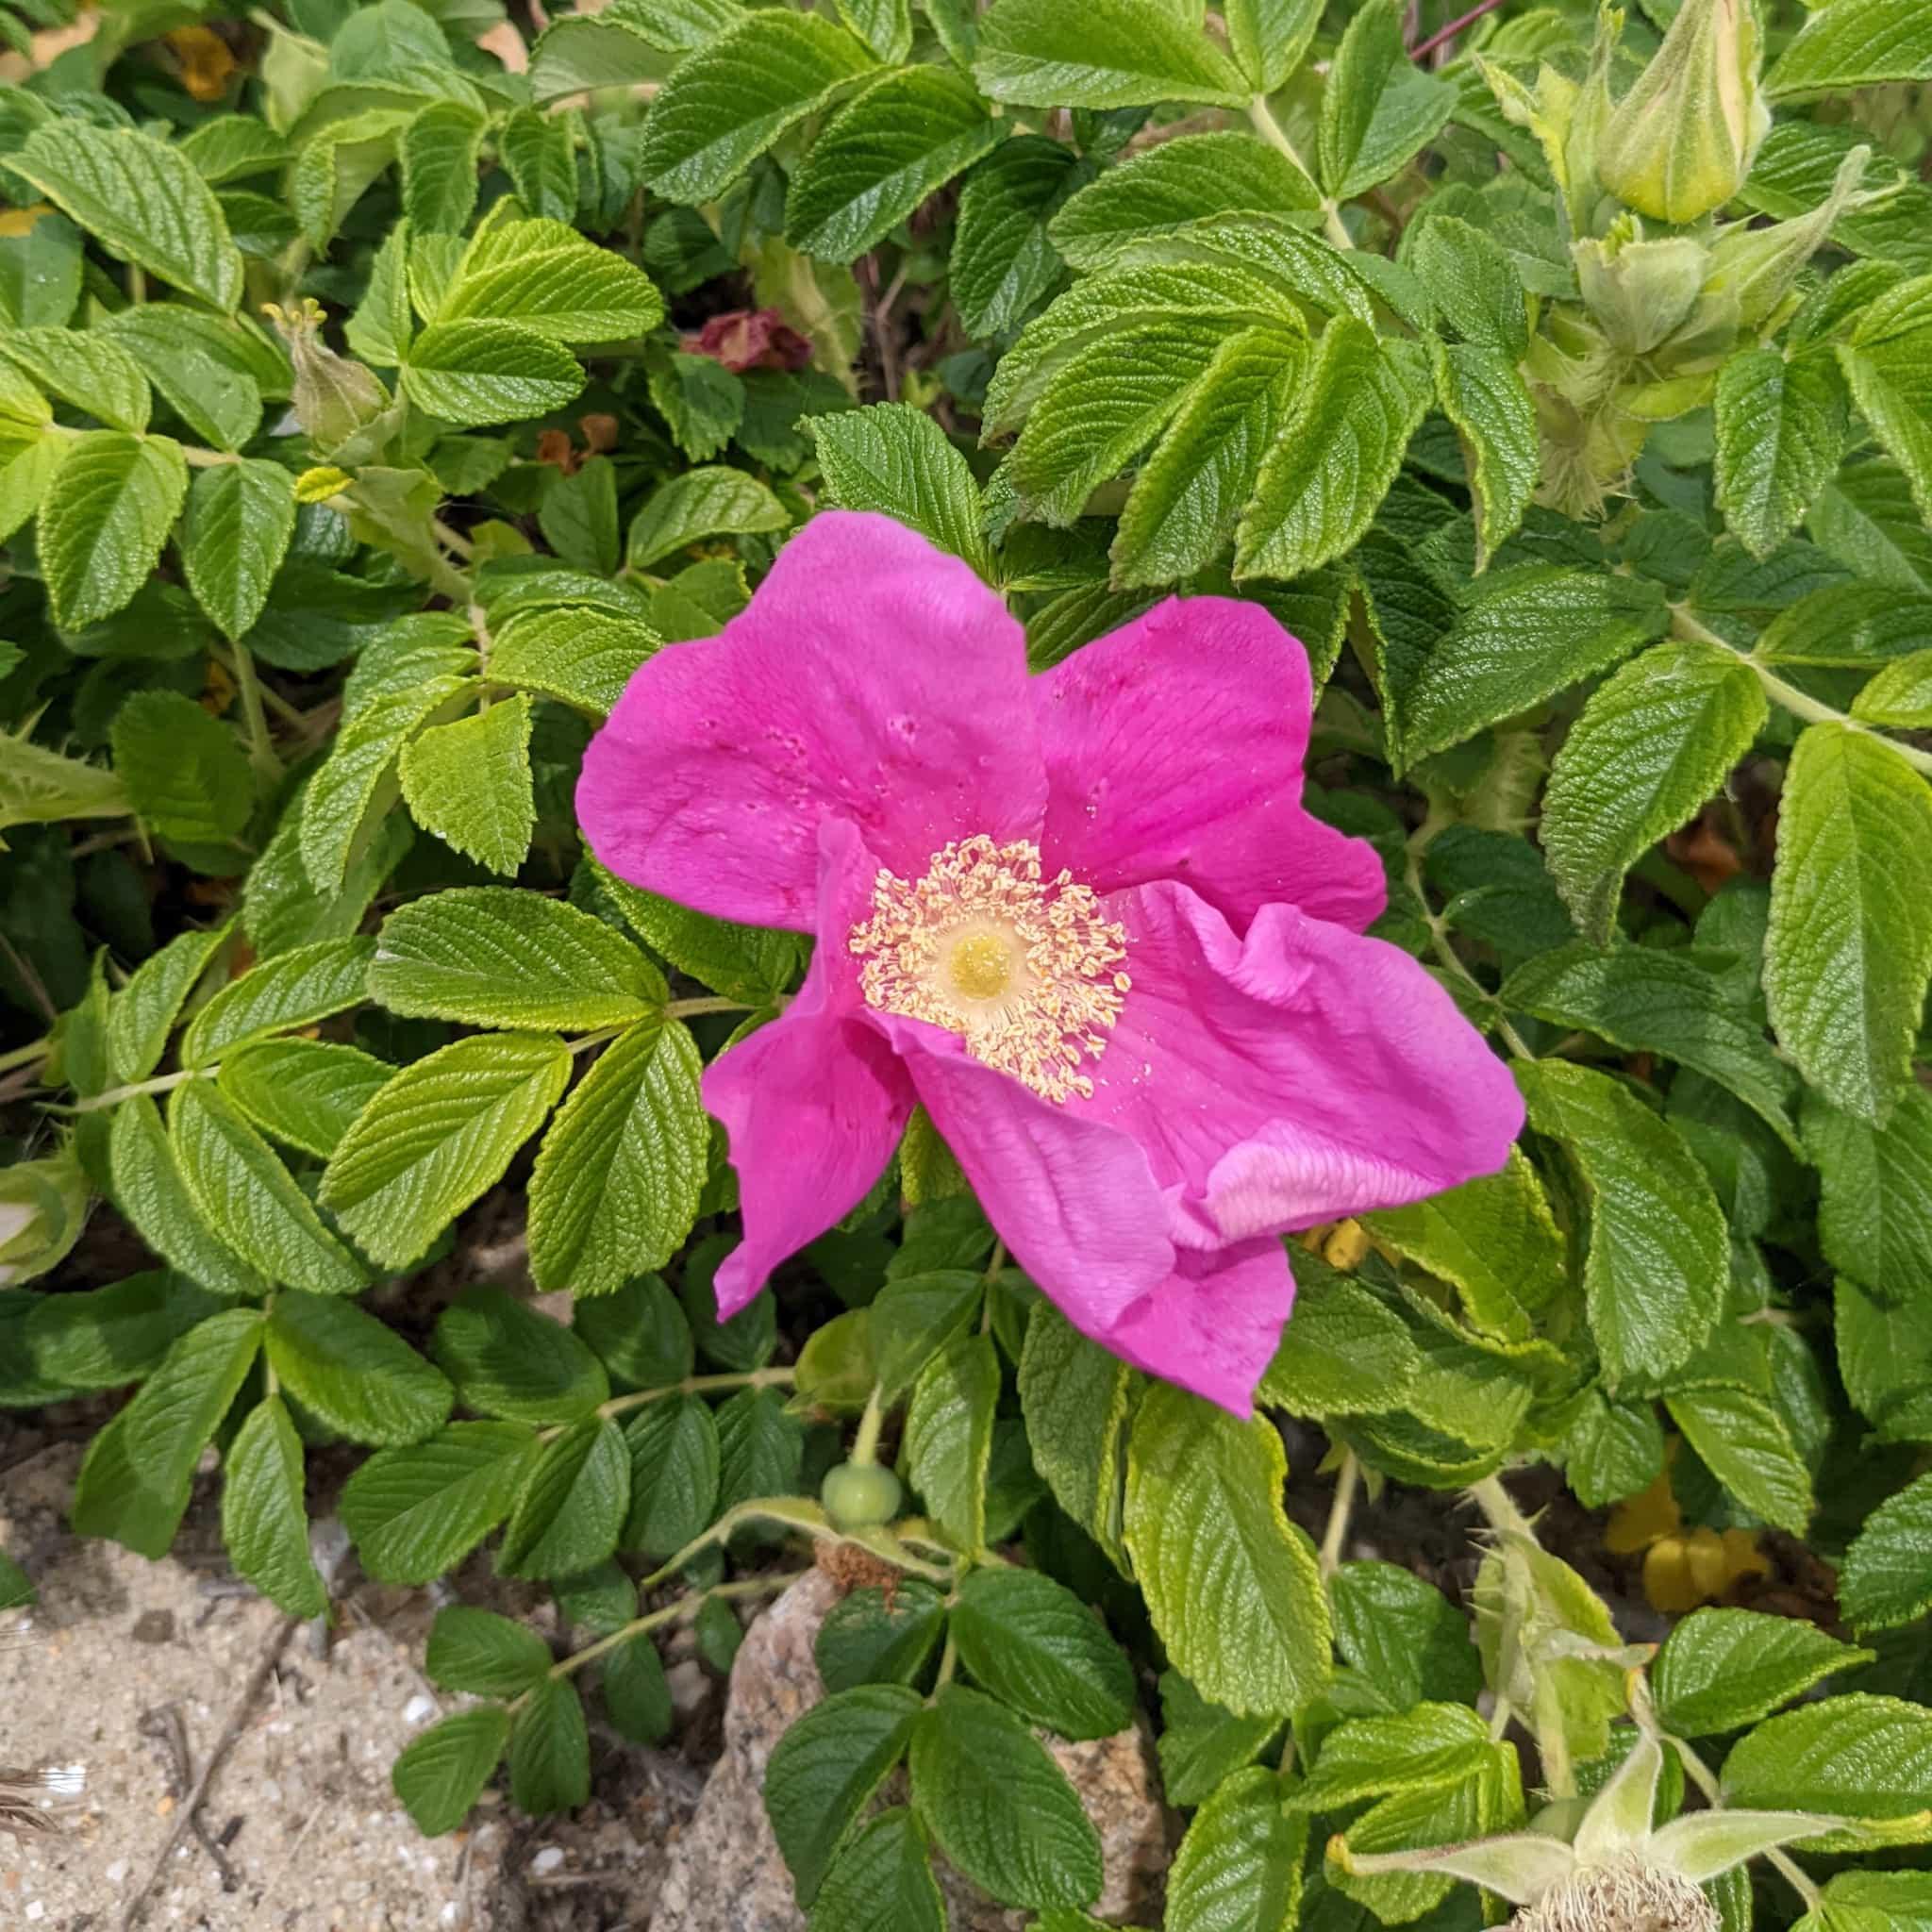 Pink flower against a bed of green leaves